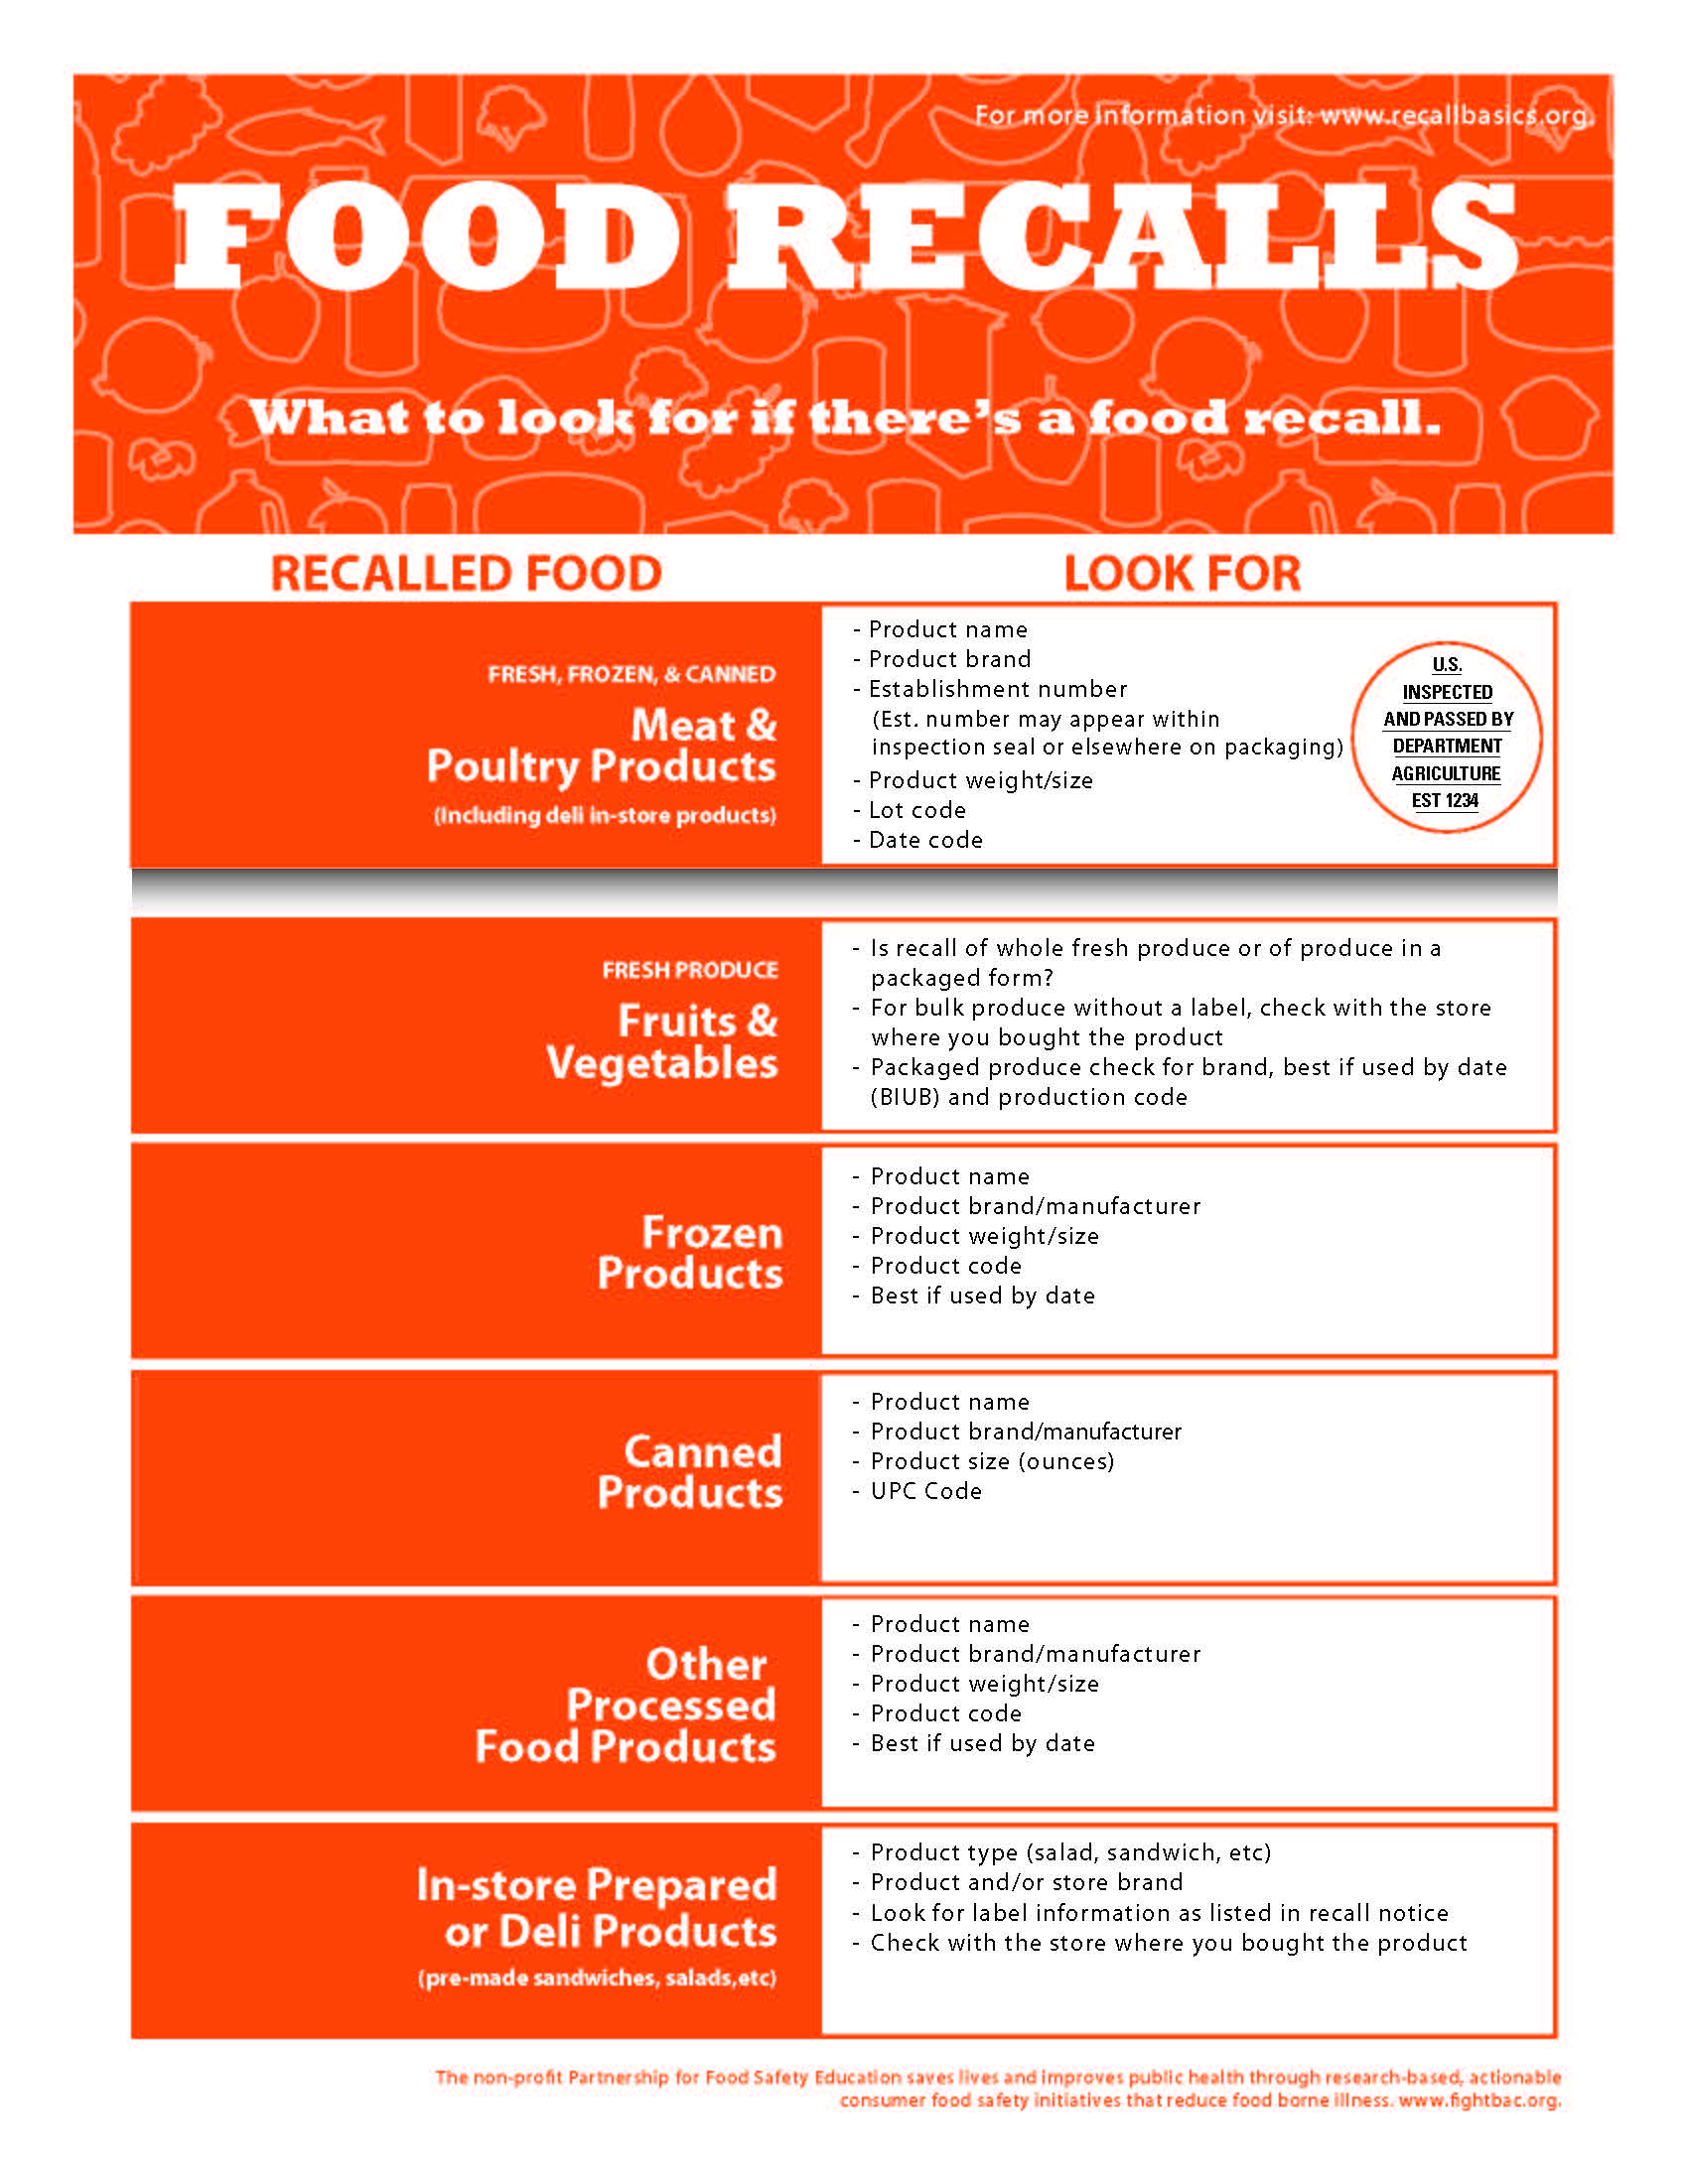 Food recalls what to look for